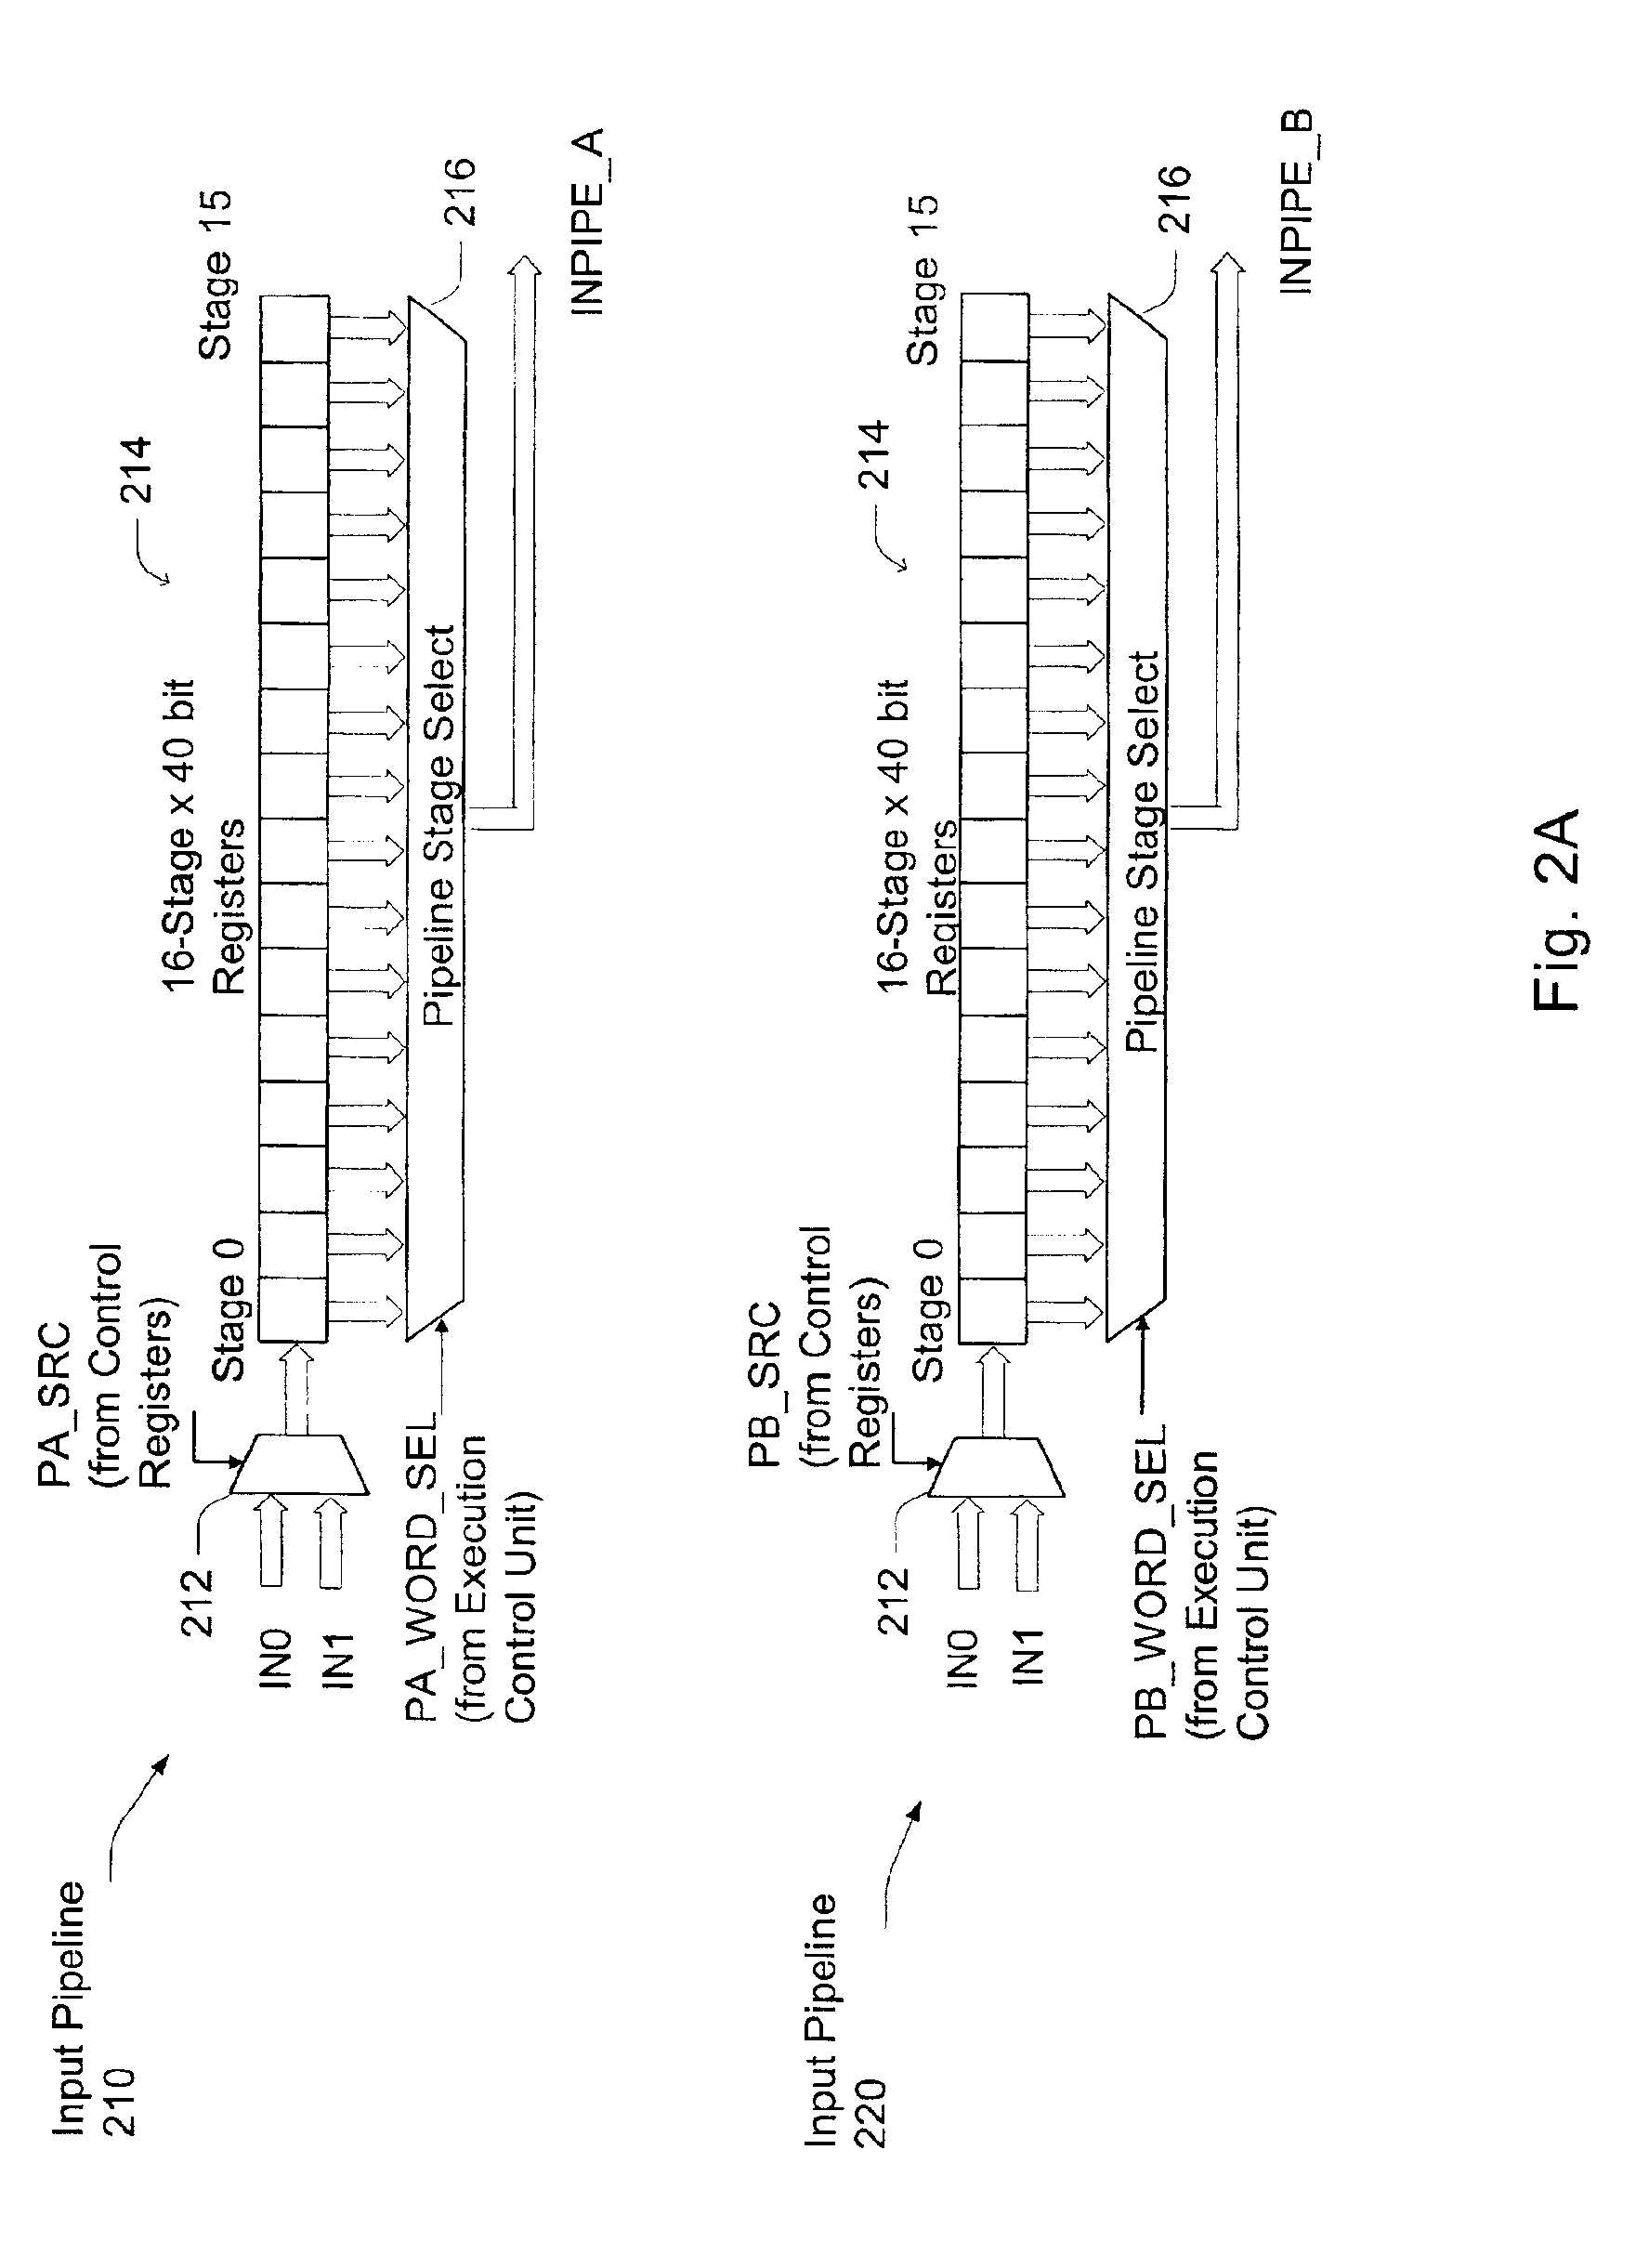 Synchronous network traffic processor